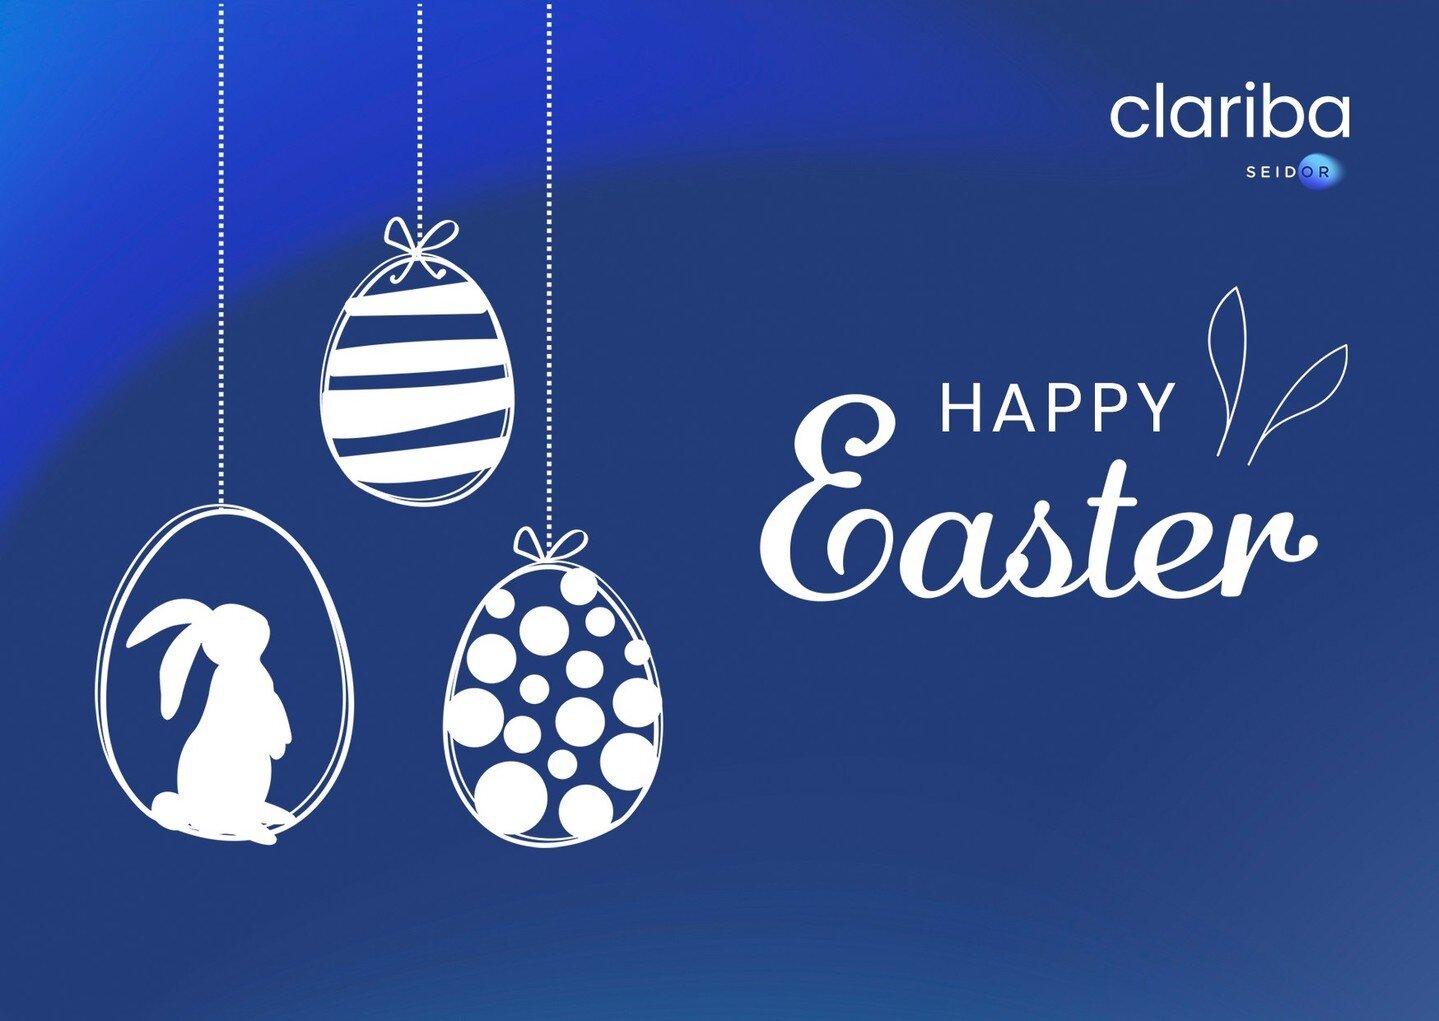 🐰 Happy Easter from the Clariba SEIDOR Team! 
 
Wishing everyone celebrating a wonderful Easter filled with happiness and love.

#HappyEaster #Easter2024 
#ClaribaSEIDOR @seidor_mena @seidor.one.me